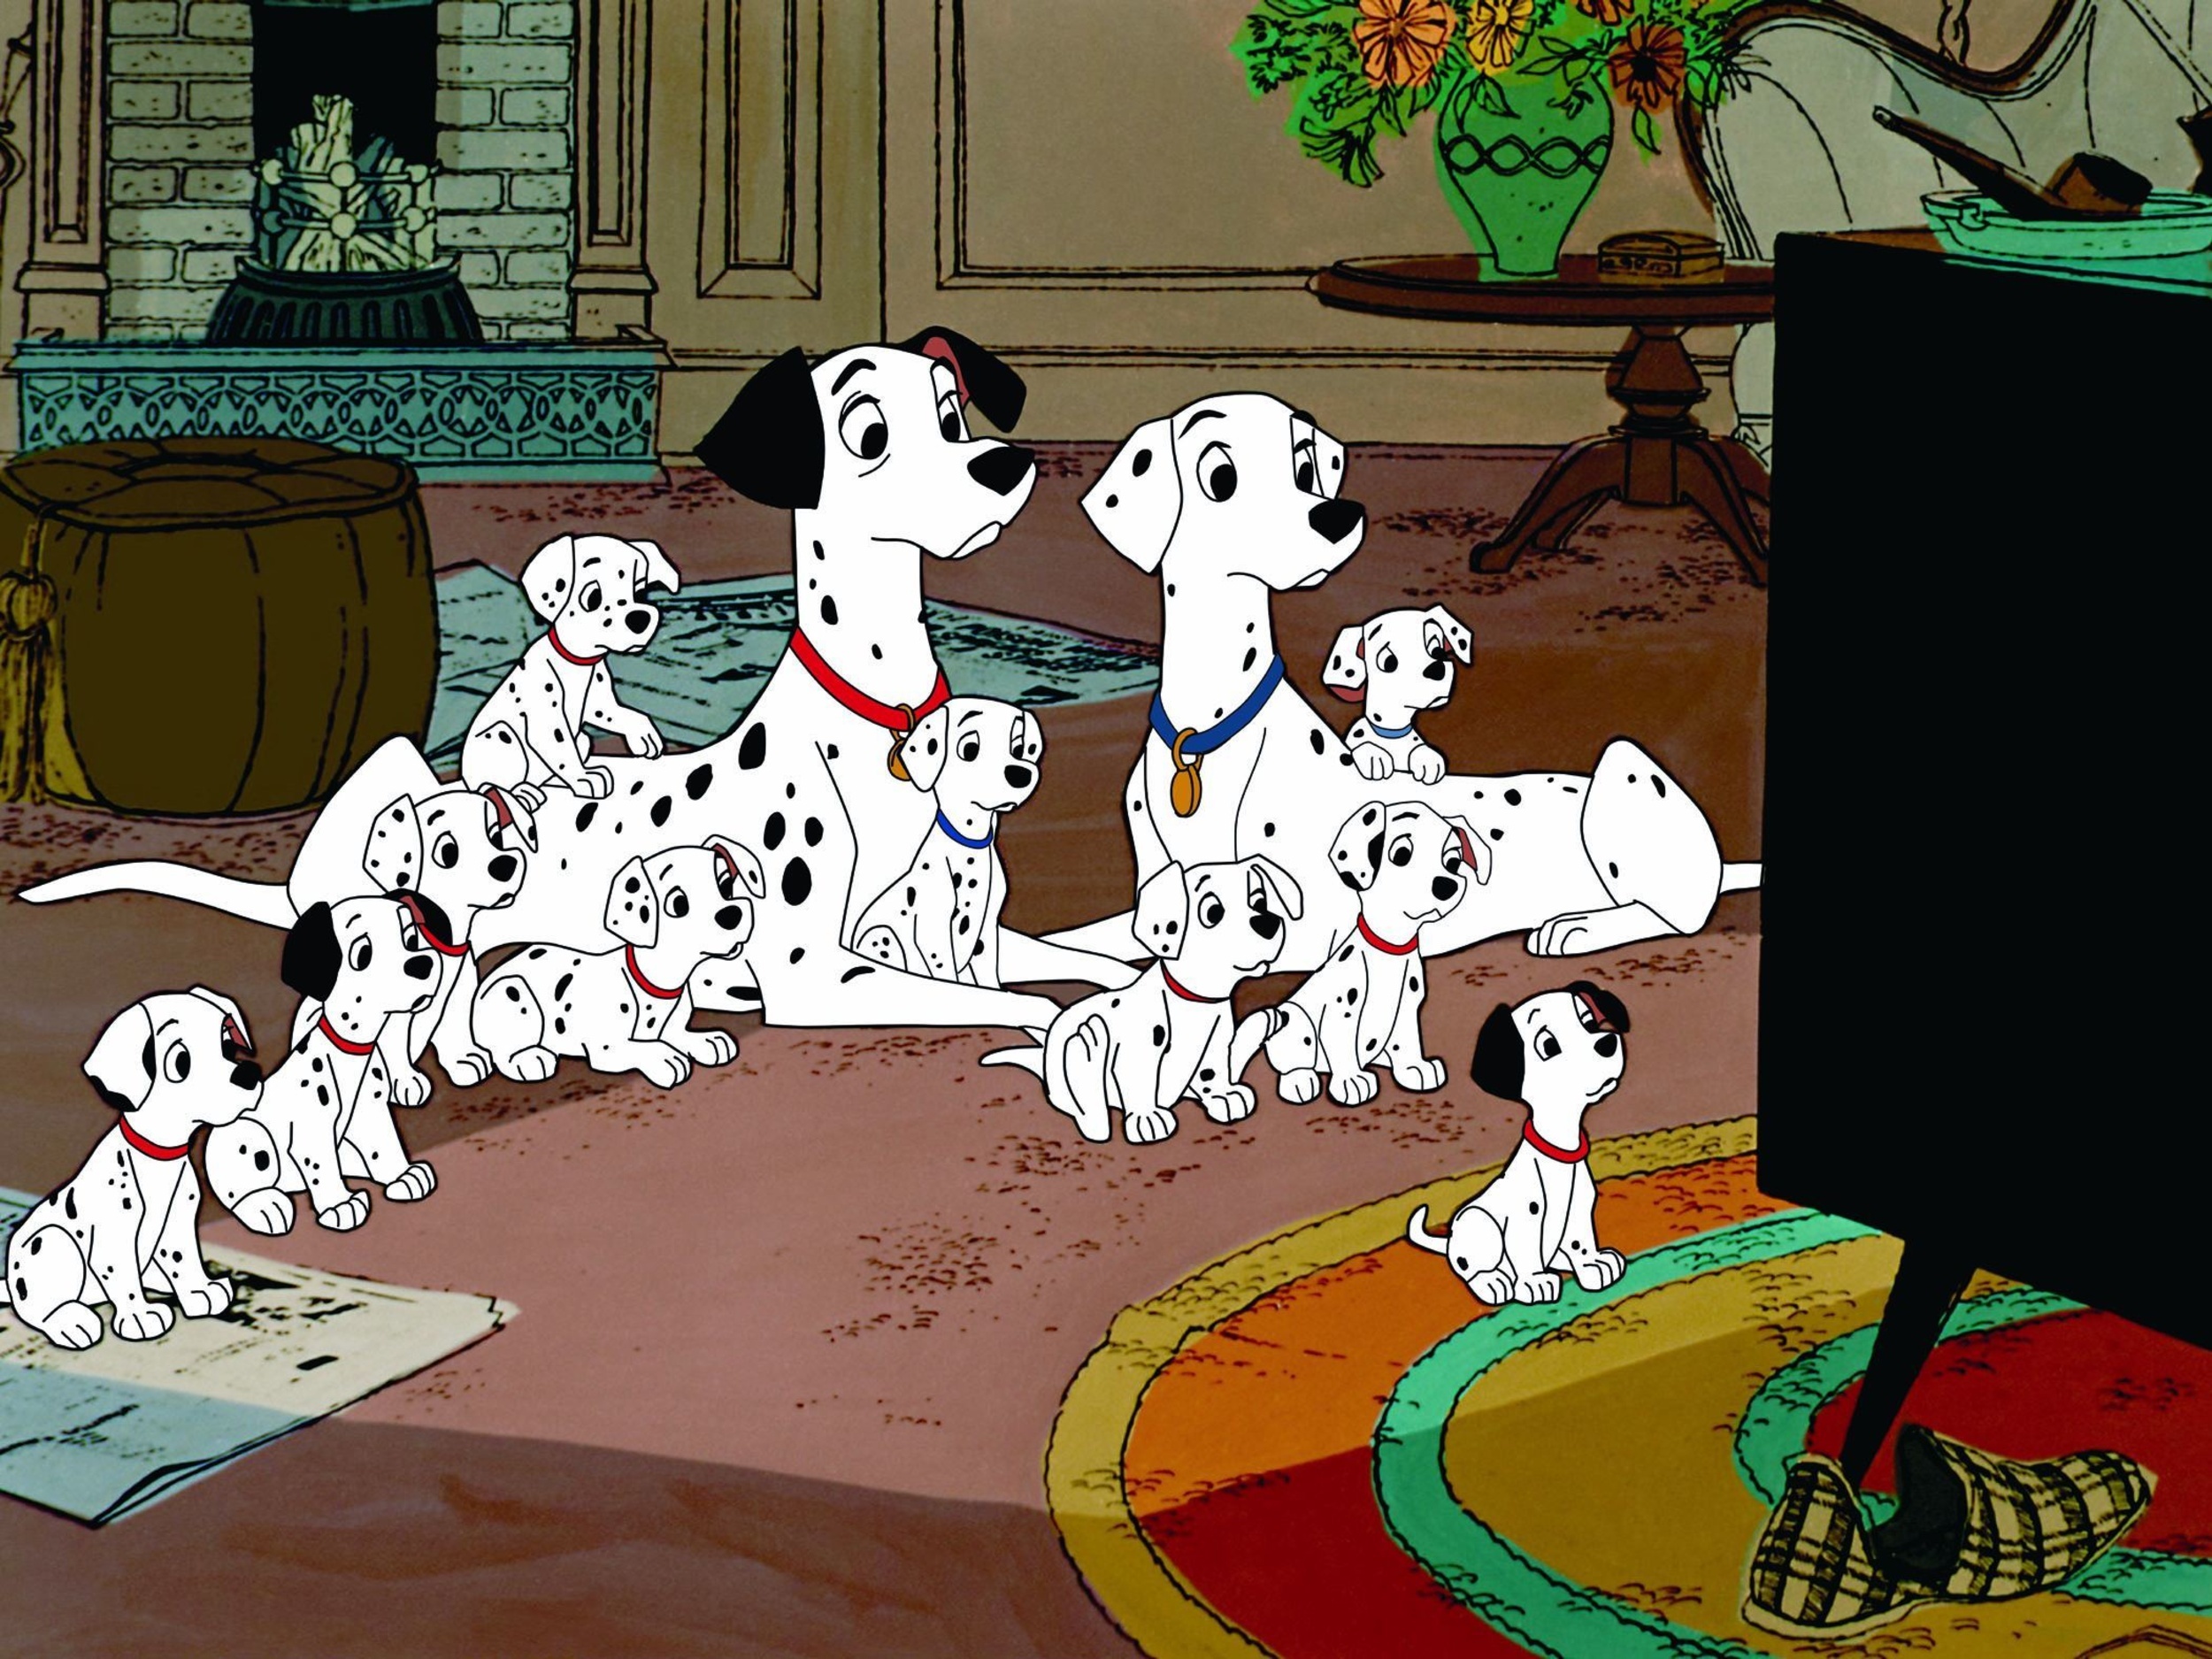 <p>Hey, animated dogs still count. Plus, there are a ton of dogs in this movie. At least, like, 50 if we had to guess. Of course, in addition to all the dogs there is one of the iconic Disney villains, Cruella de Vil, who eventually got her own live-action movie where she’s played by Emma Stone.</p><p><a href='https://www.msn.com/en-us/community/channel/vid-cj9pqbr0vn9in2b6ddcd8sfgpfq6x6utp44fssrv6mc2gtybw0us'>Follow us on MSN to see more of our exclusive entertainment content.</a></p>